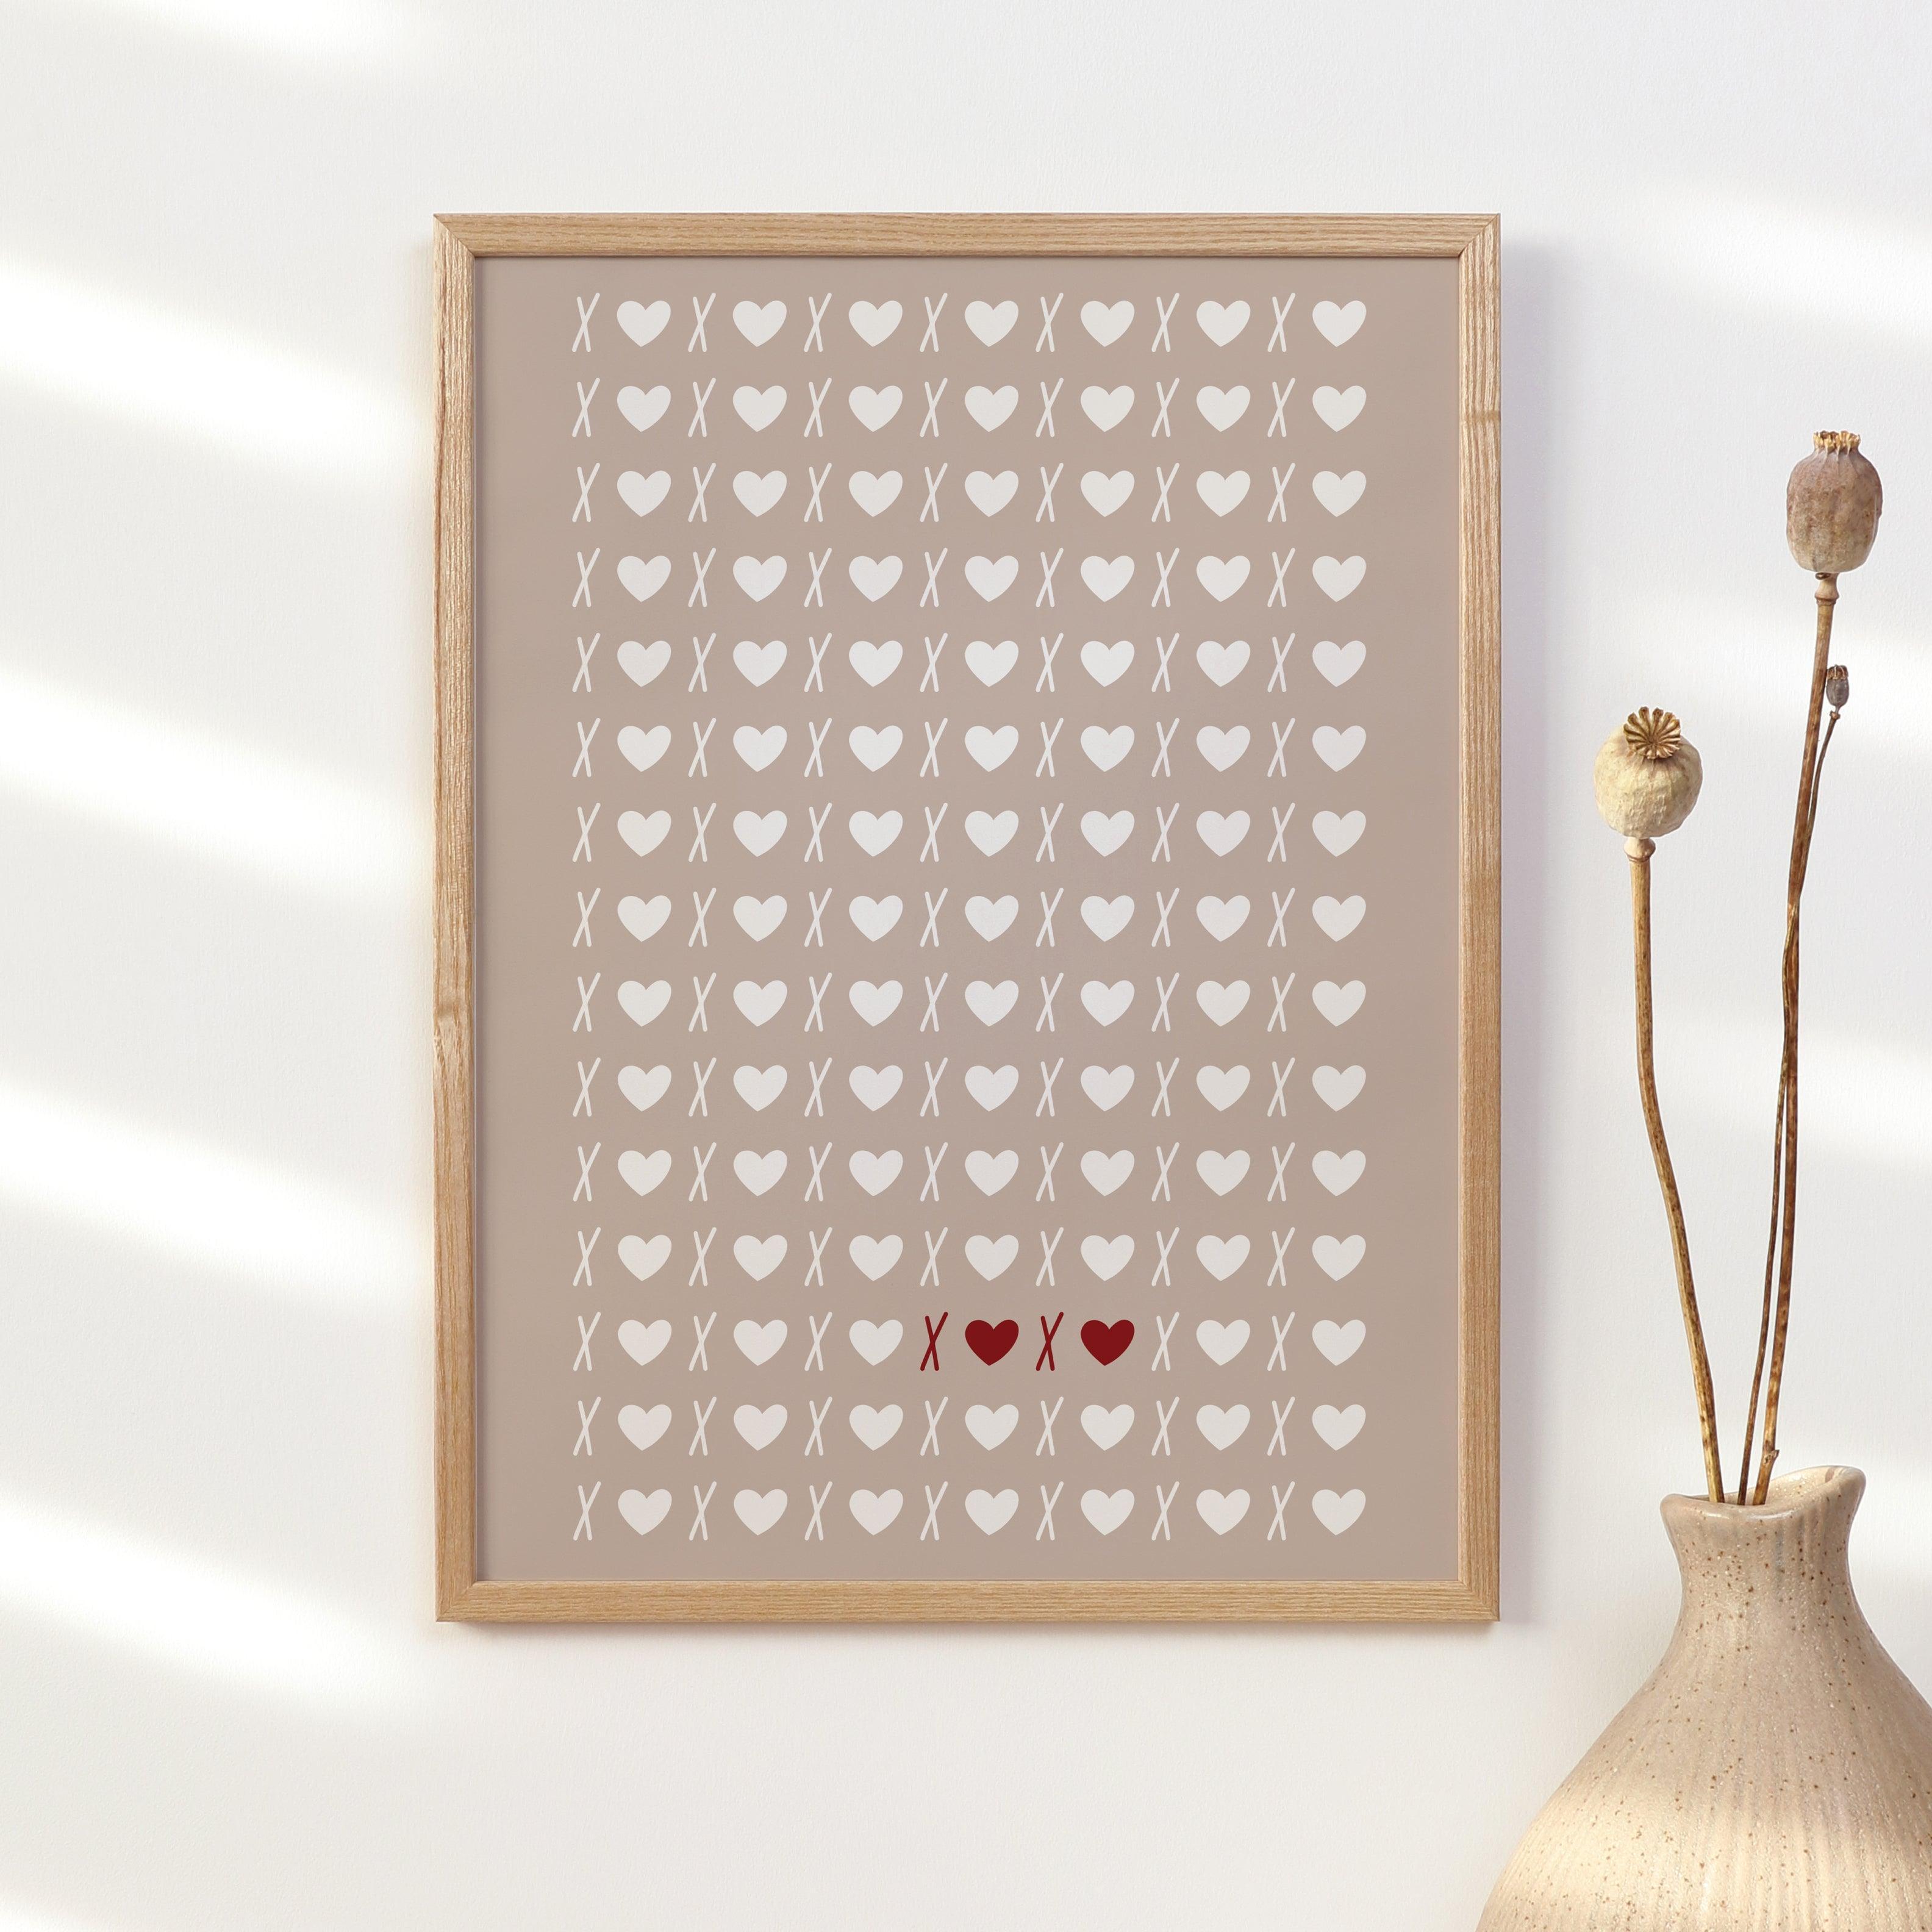 XOXO Hearts Print - Neutral Valentine&#39;s Day Home Decor Poster - Quote Print Poster - The Willow Corner